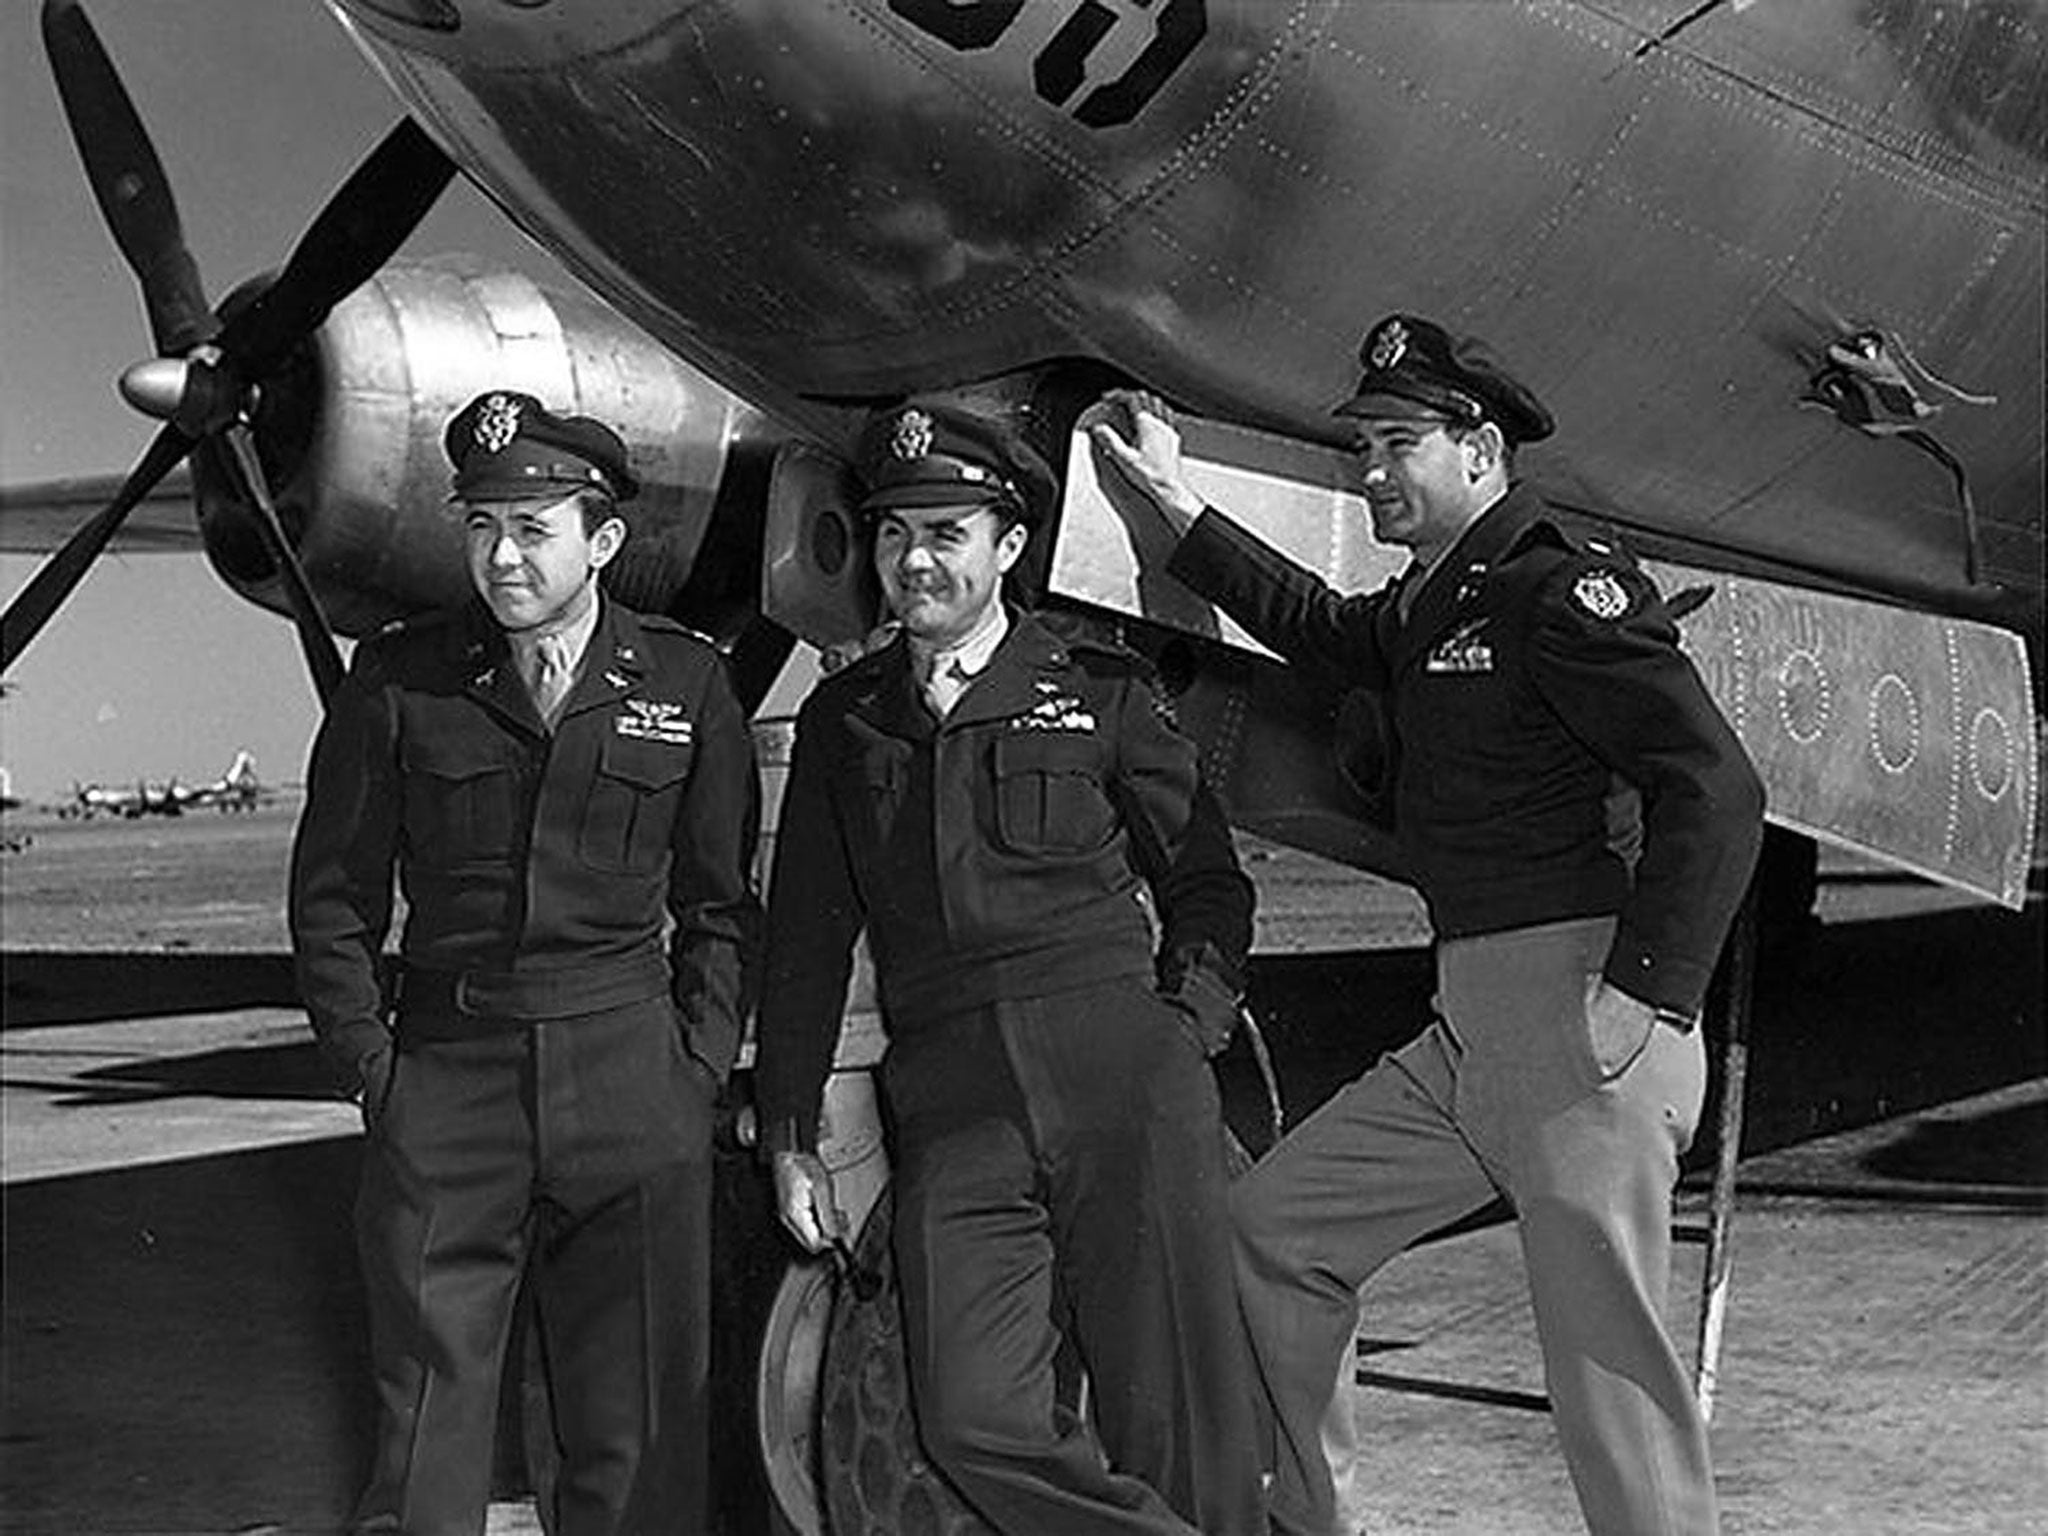 crew of enola gay subsequent history